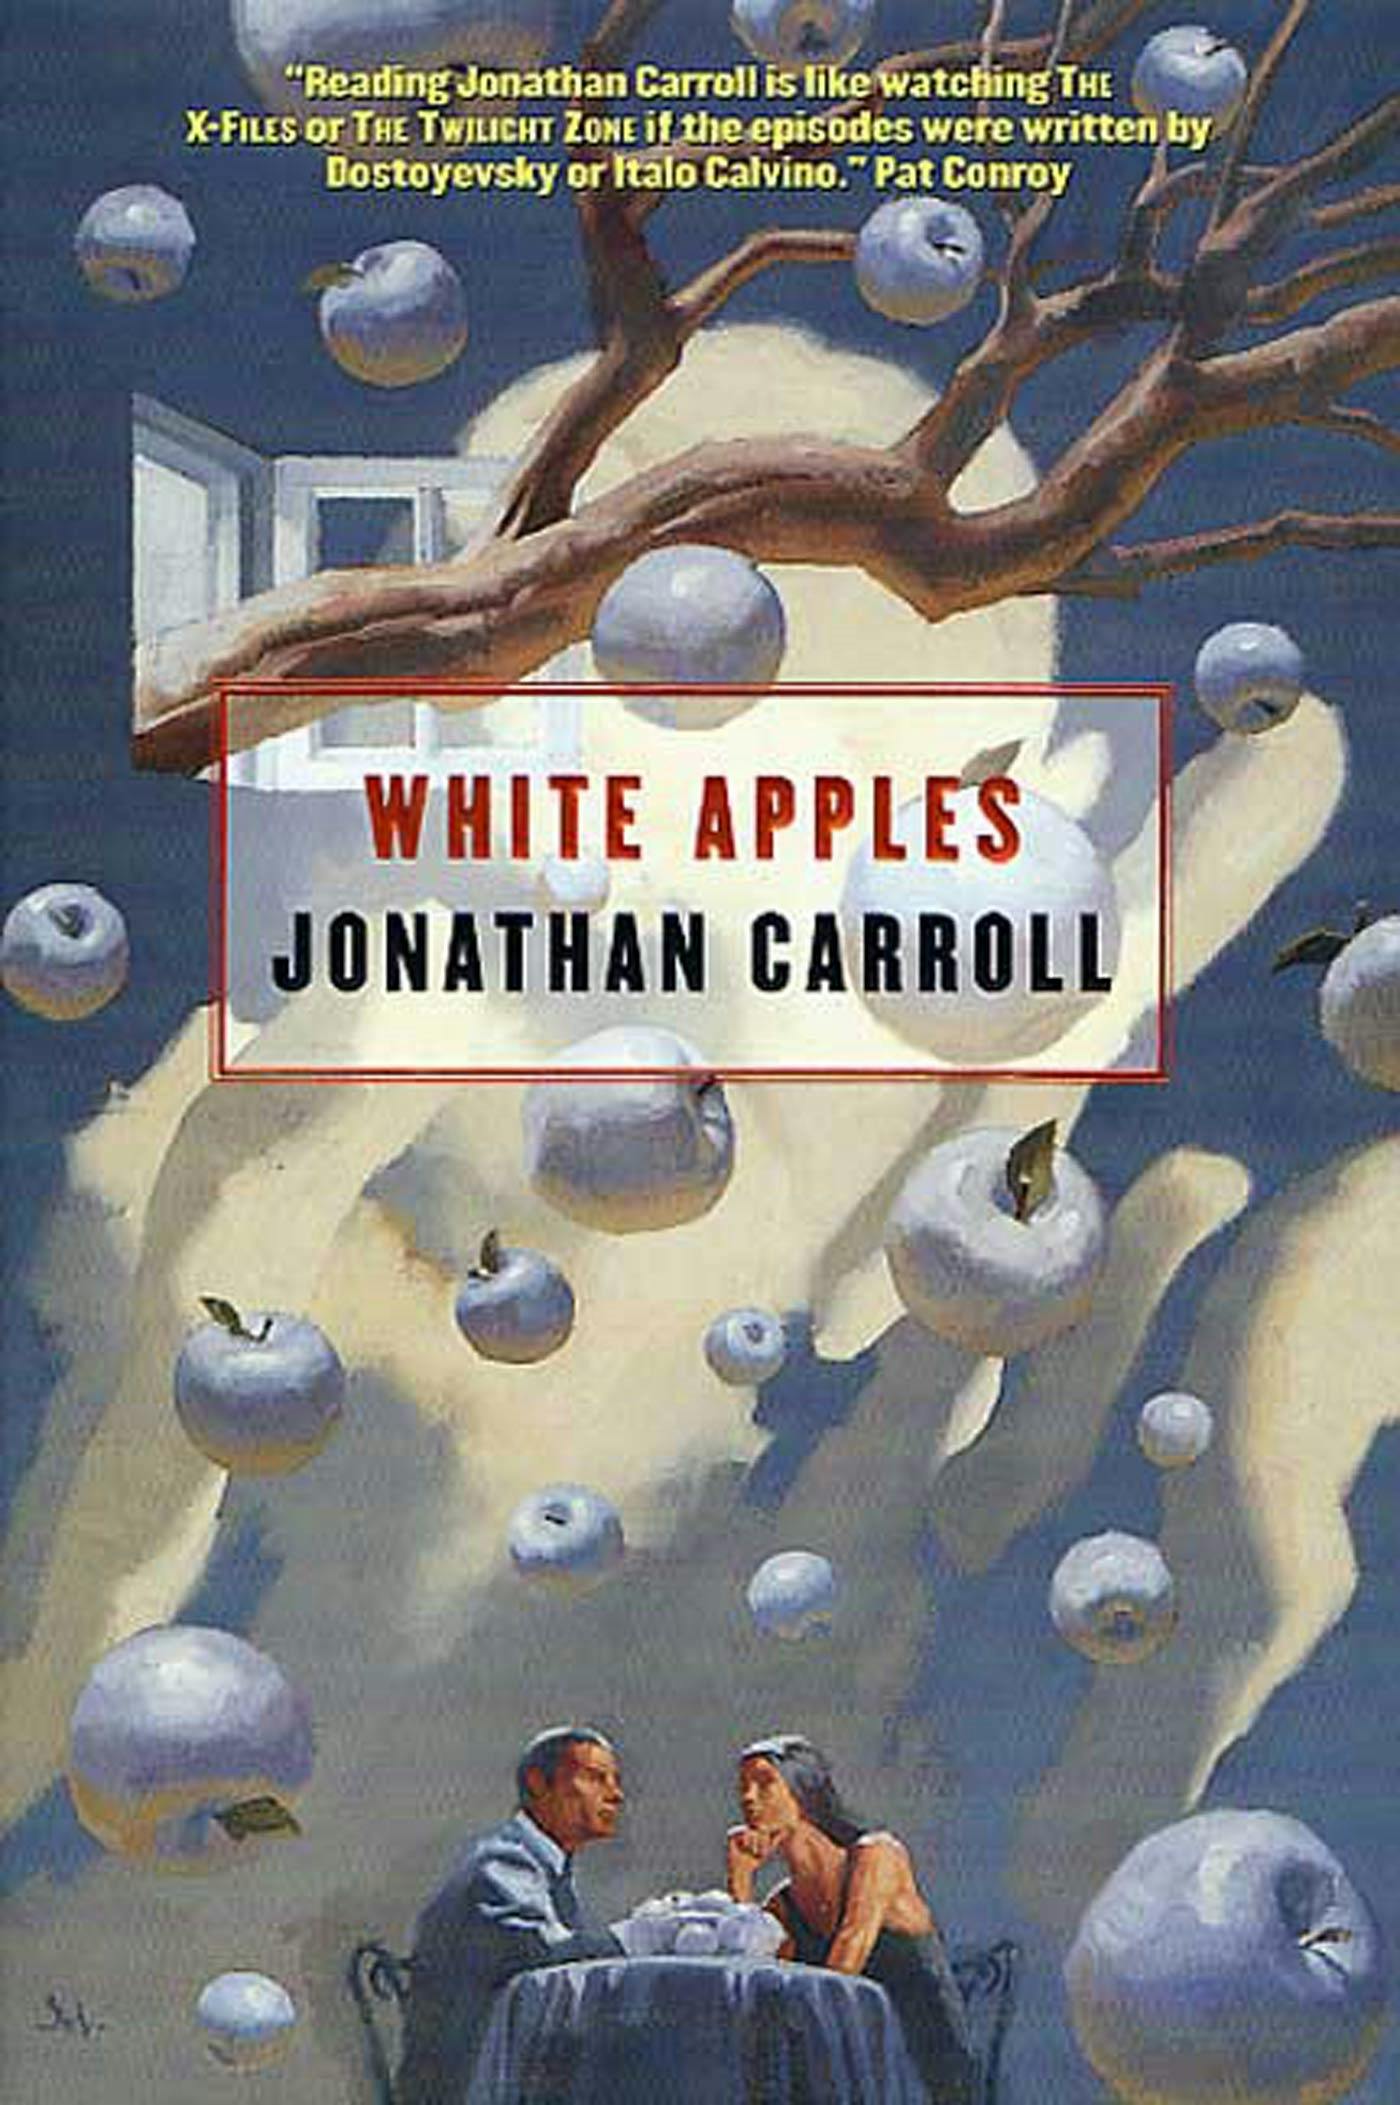 Cover for the book titled as: White Apples